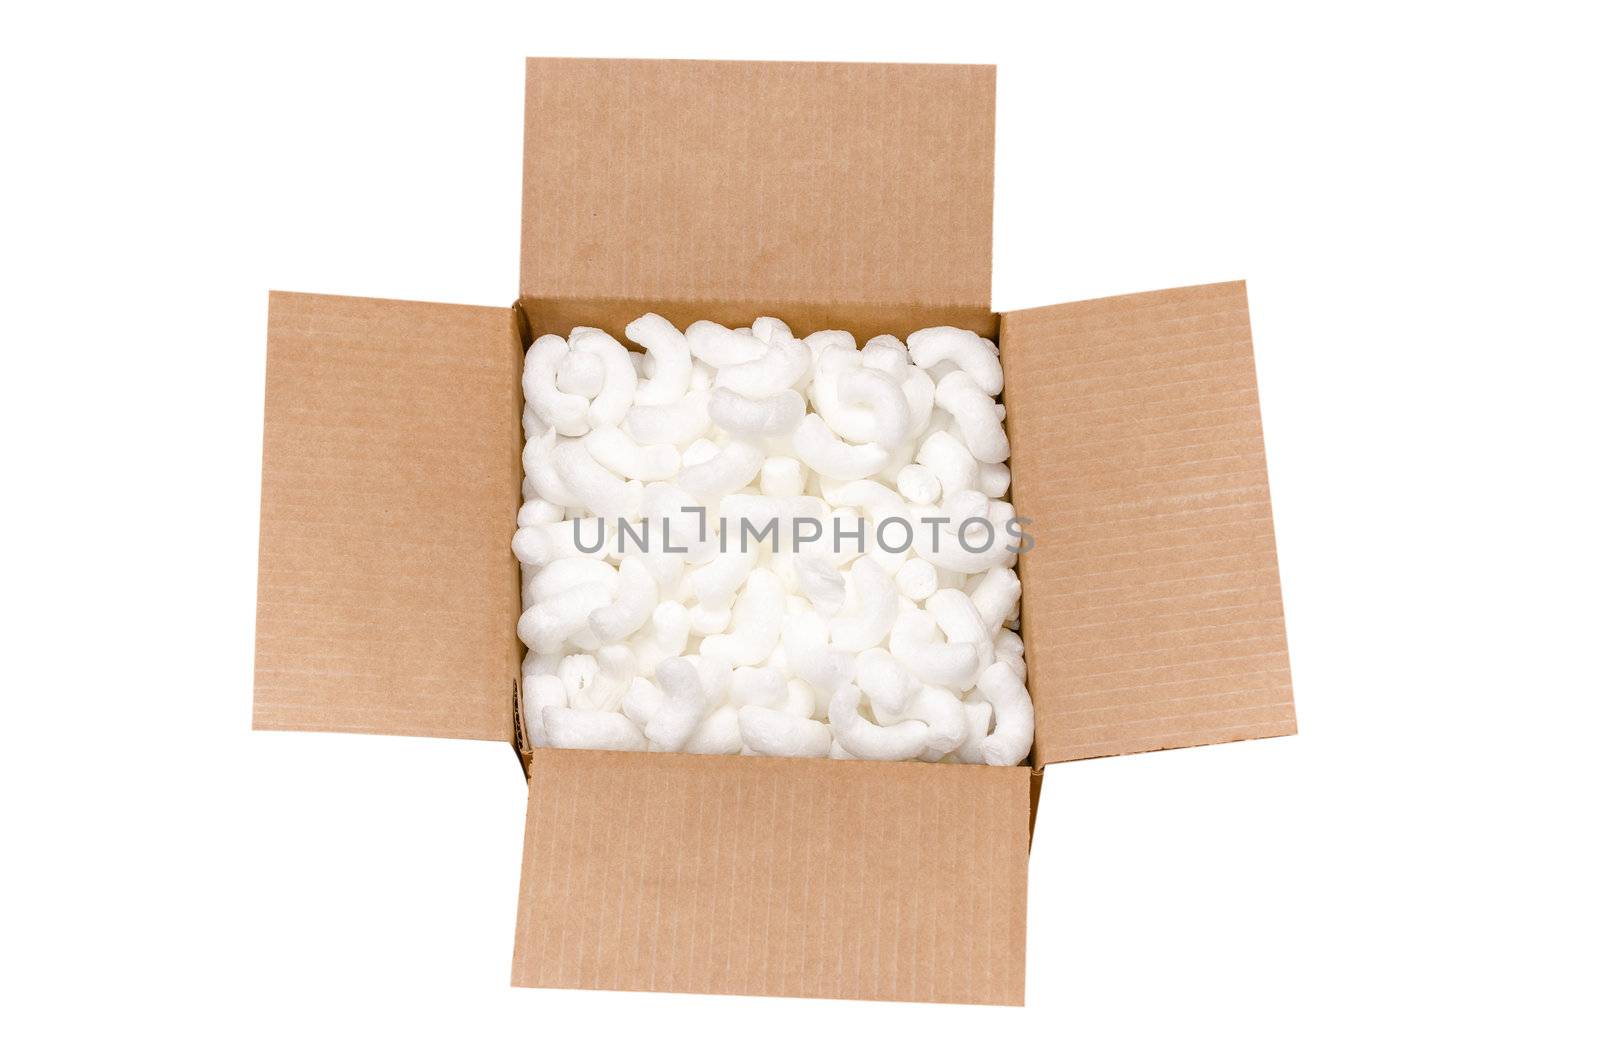 Shipping box with packing peanuts  isolated on white background with clipping path.